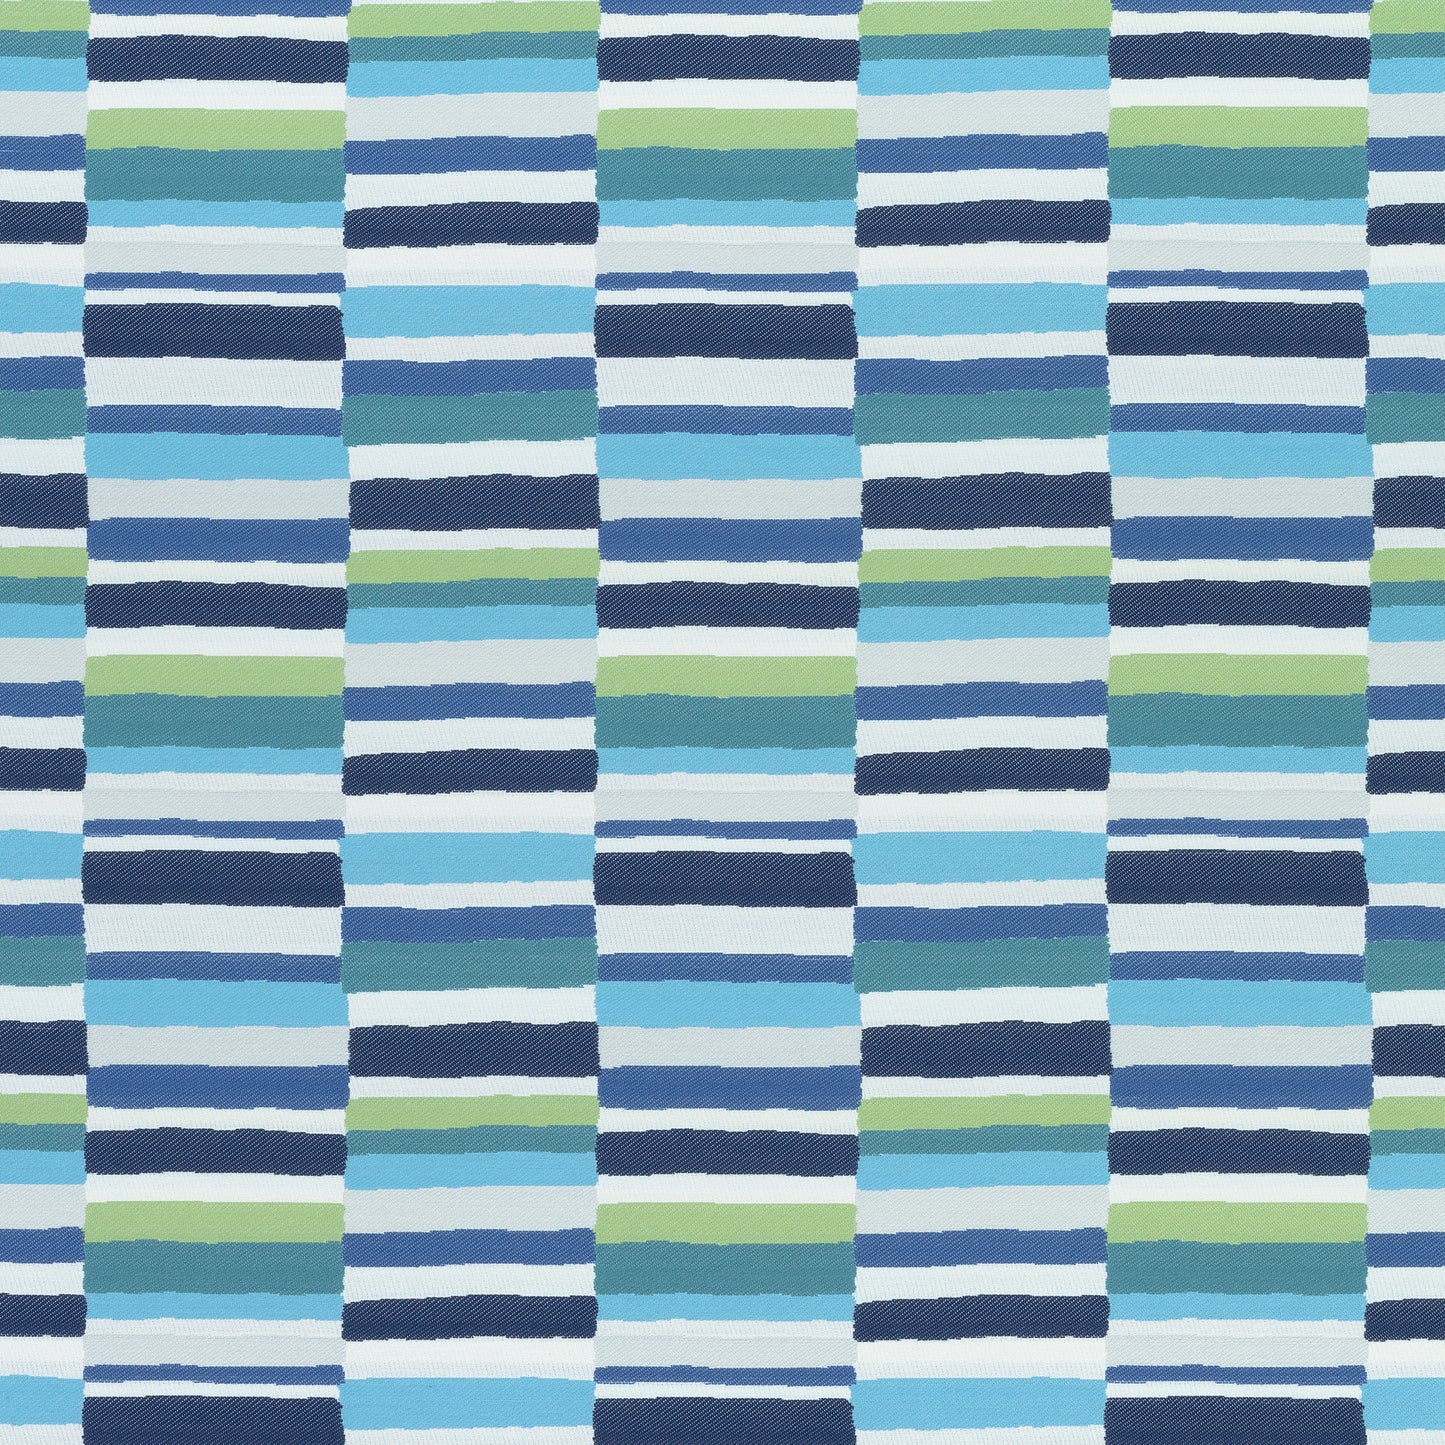 Purchase Thibaut Fabric Item# W74686 pattern name Carnivale color Blue and Green